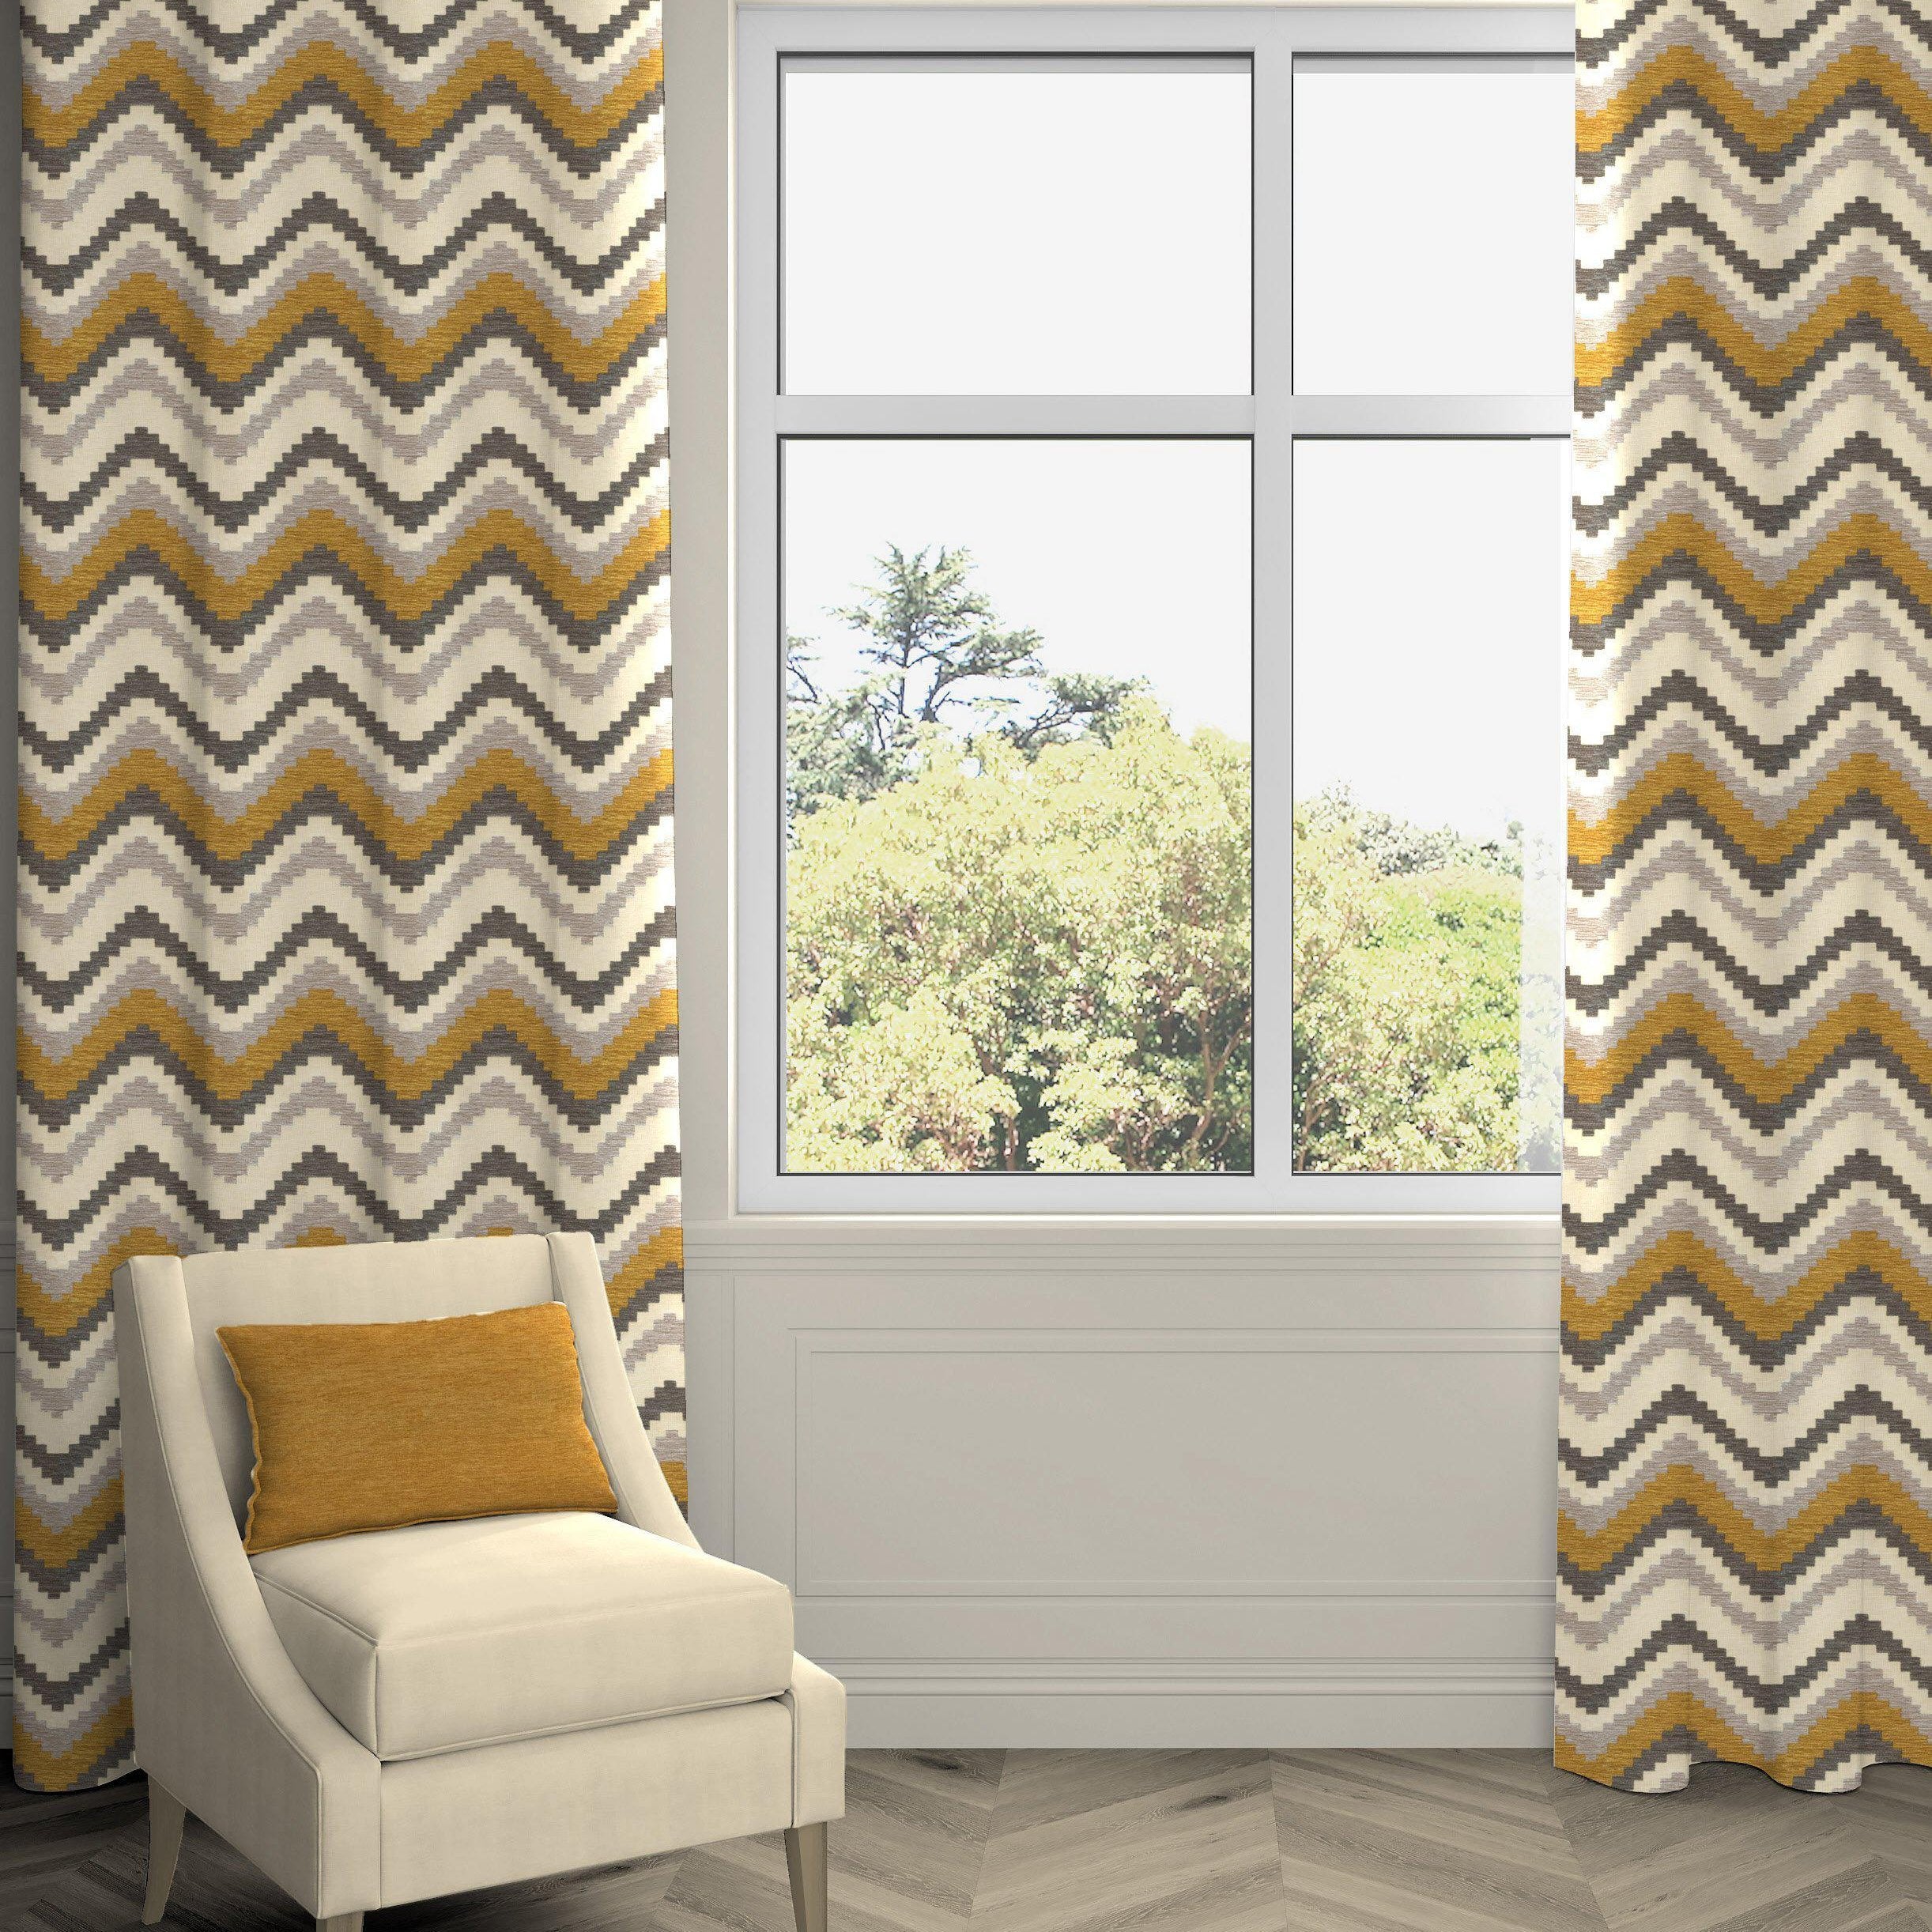 McAlister Textiles Navajo Yellow + Grey Striped Curtains Tailored Curtains 116cm(w) x 182cm(d) (46" x 72") 